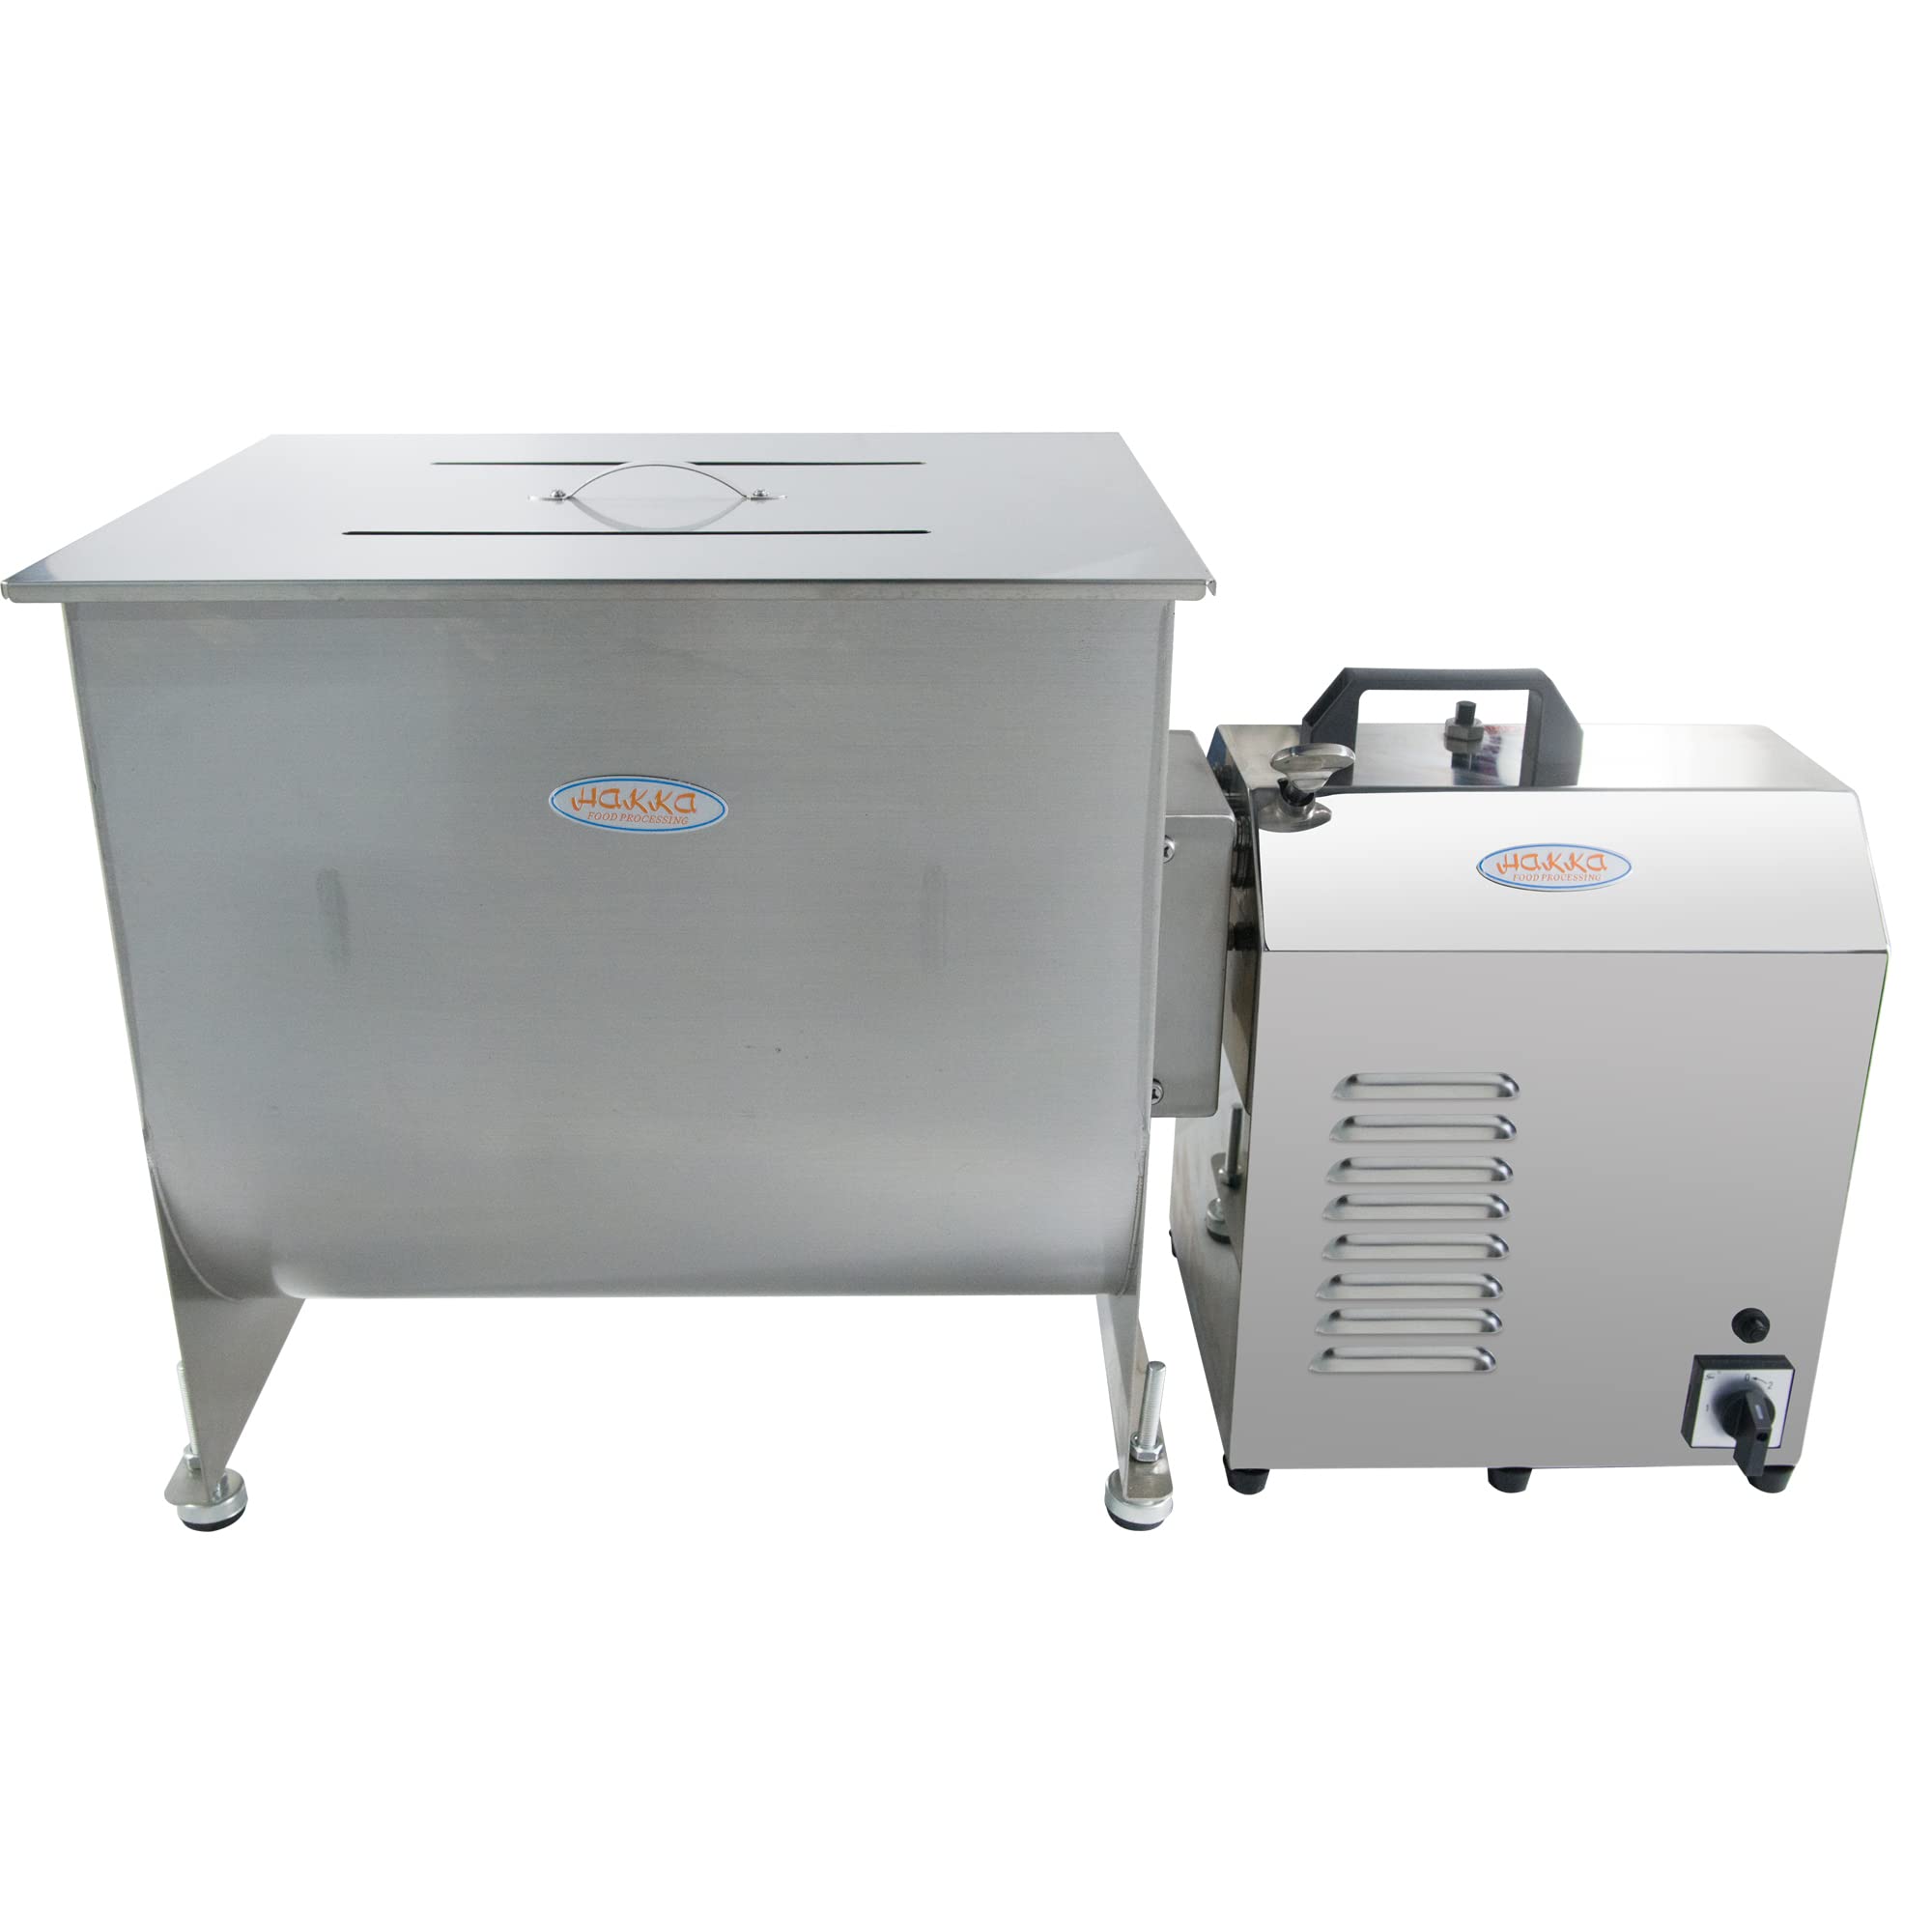 Hakka 80-Pound/40-Liter capacity Tank Stainless Steel Electric Meat Mixer (Mixing Maximum 60-Pound for Meat)